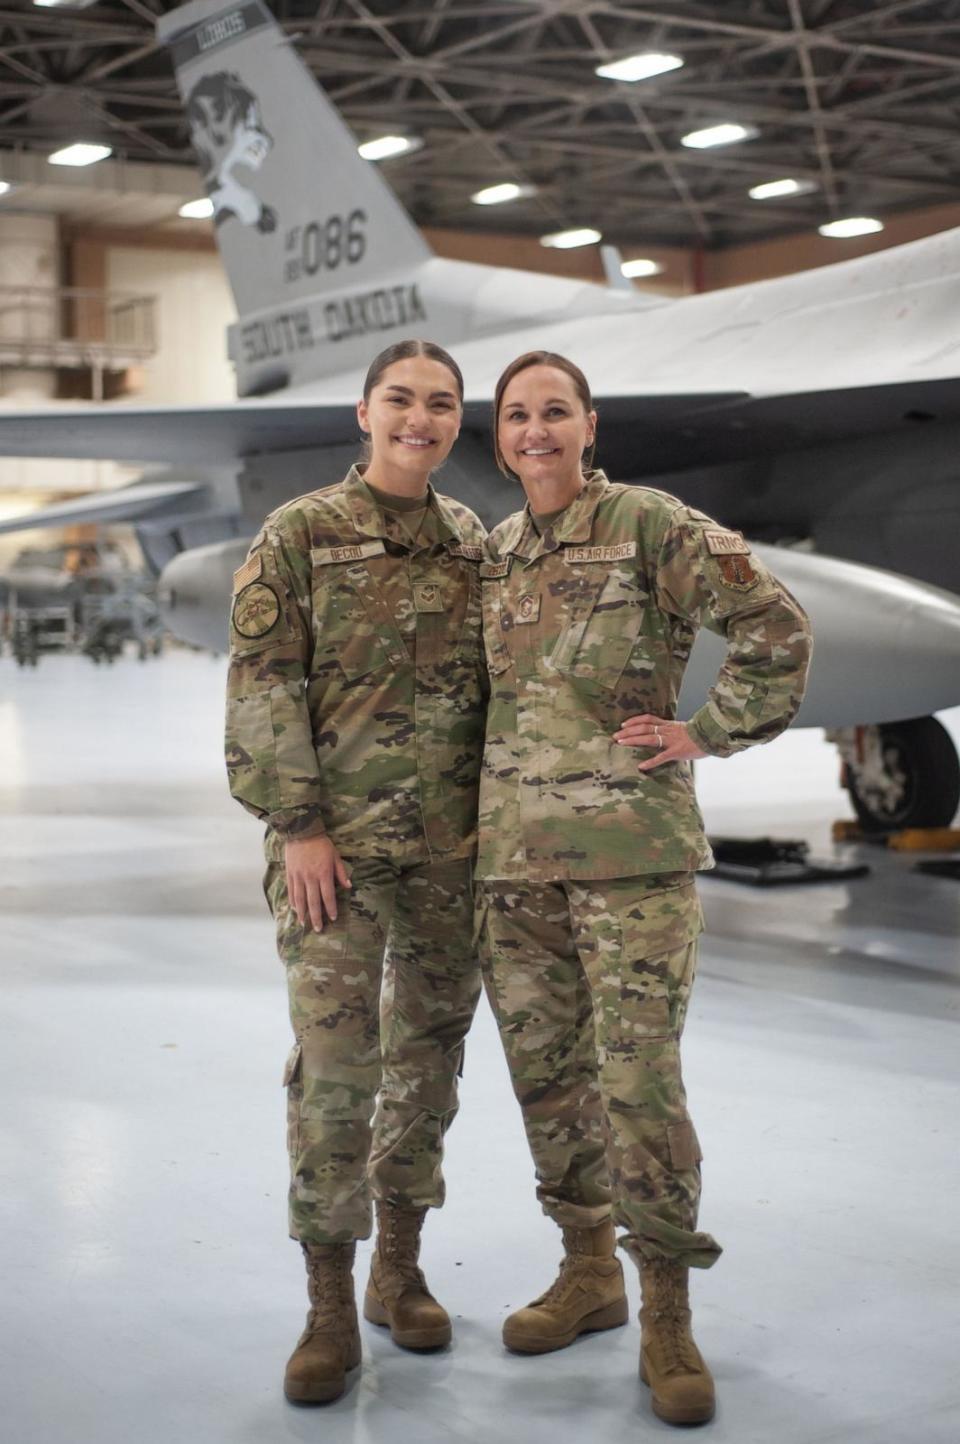 PHOTO: Senior Airman Jenaka DeCou is on her first deployment, alongside her mom Senior Master Sergeant Jennifer DeCou, who has been in the U.S. Air Force for the past 26 years. (Courtesy of Amy Bailey)